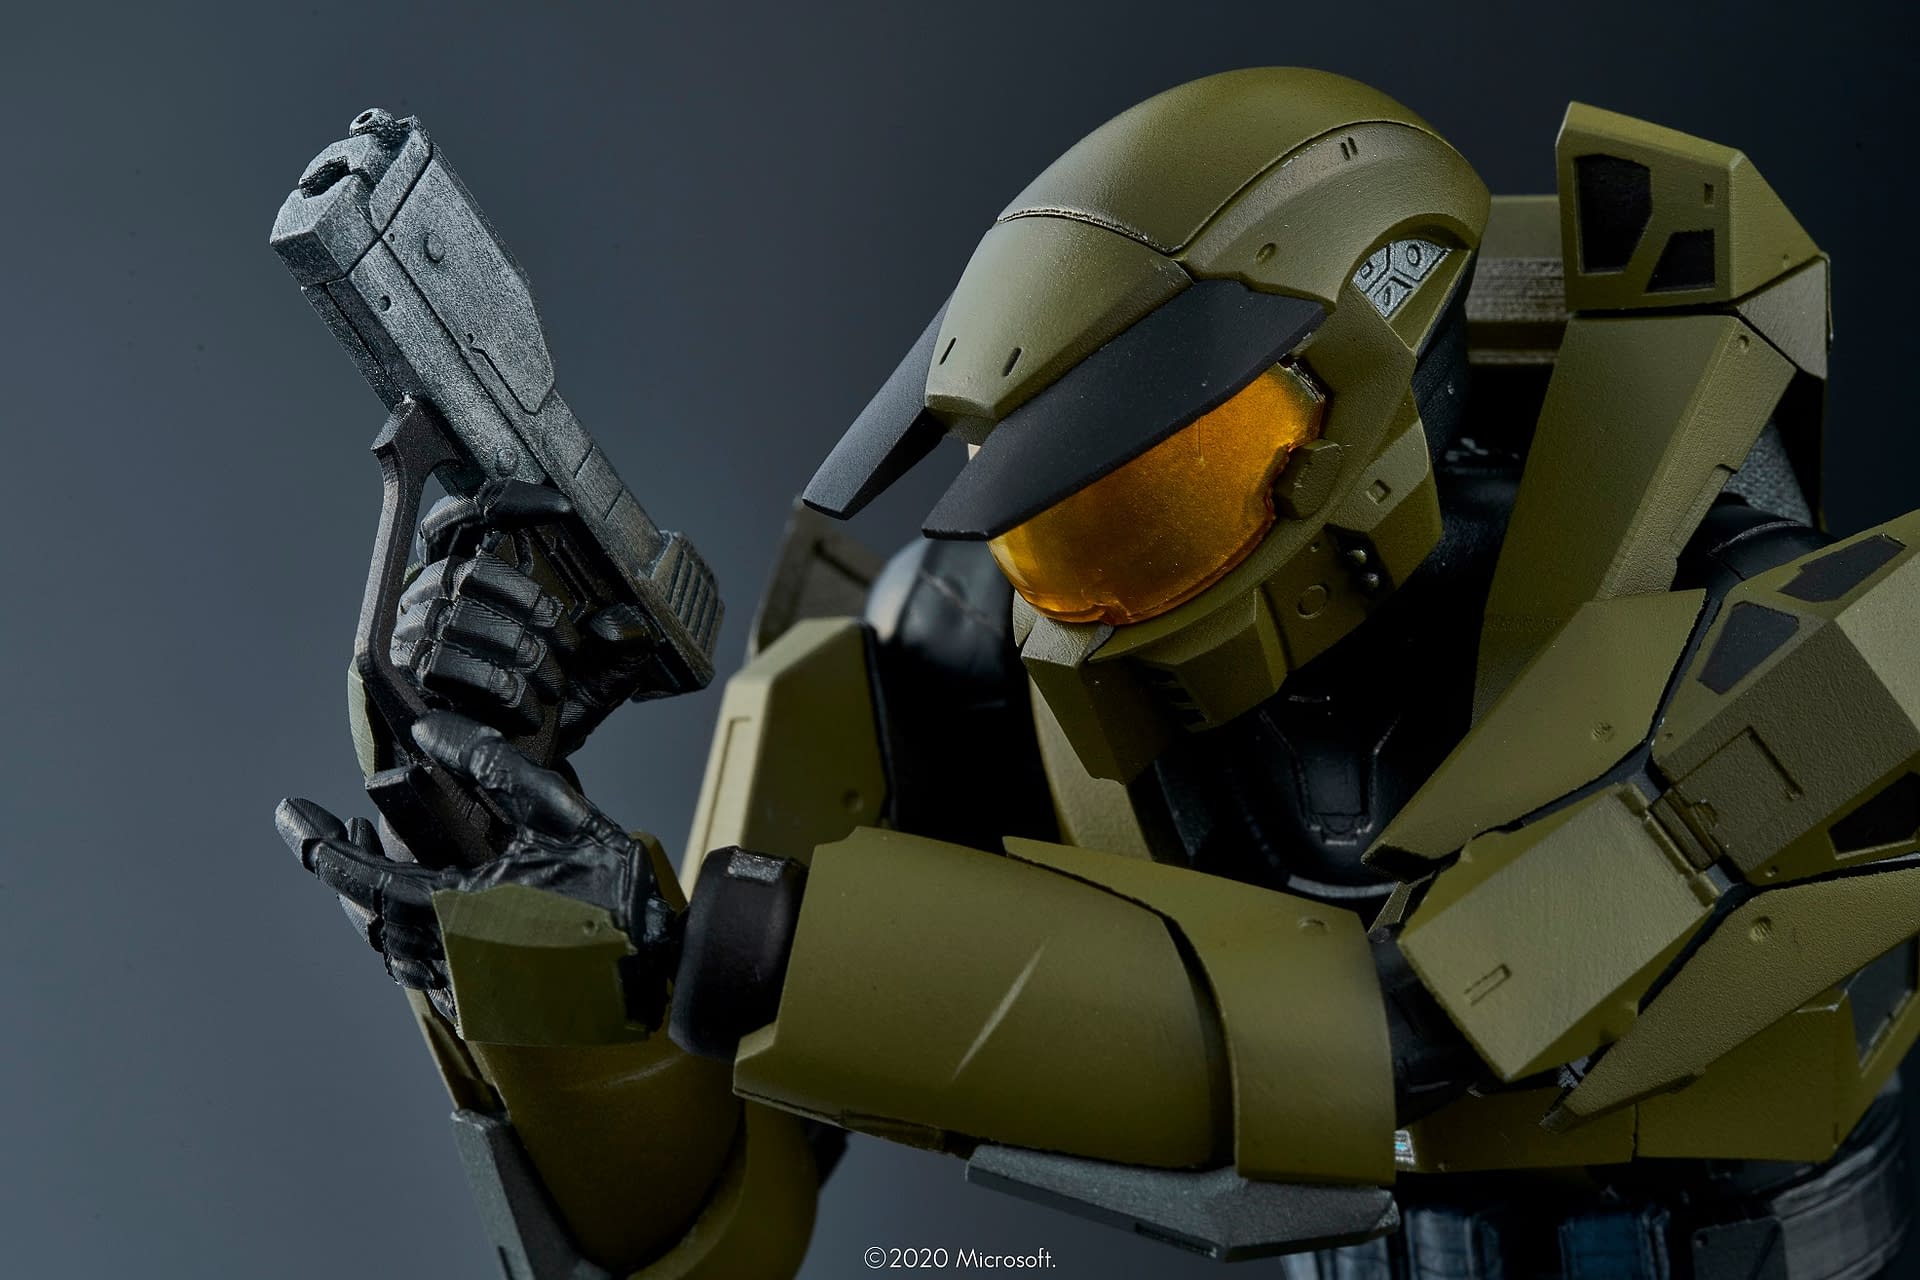 Master Chief is Ready for Deployment with New Figure from 1000 Toys